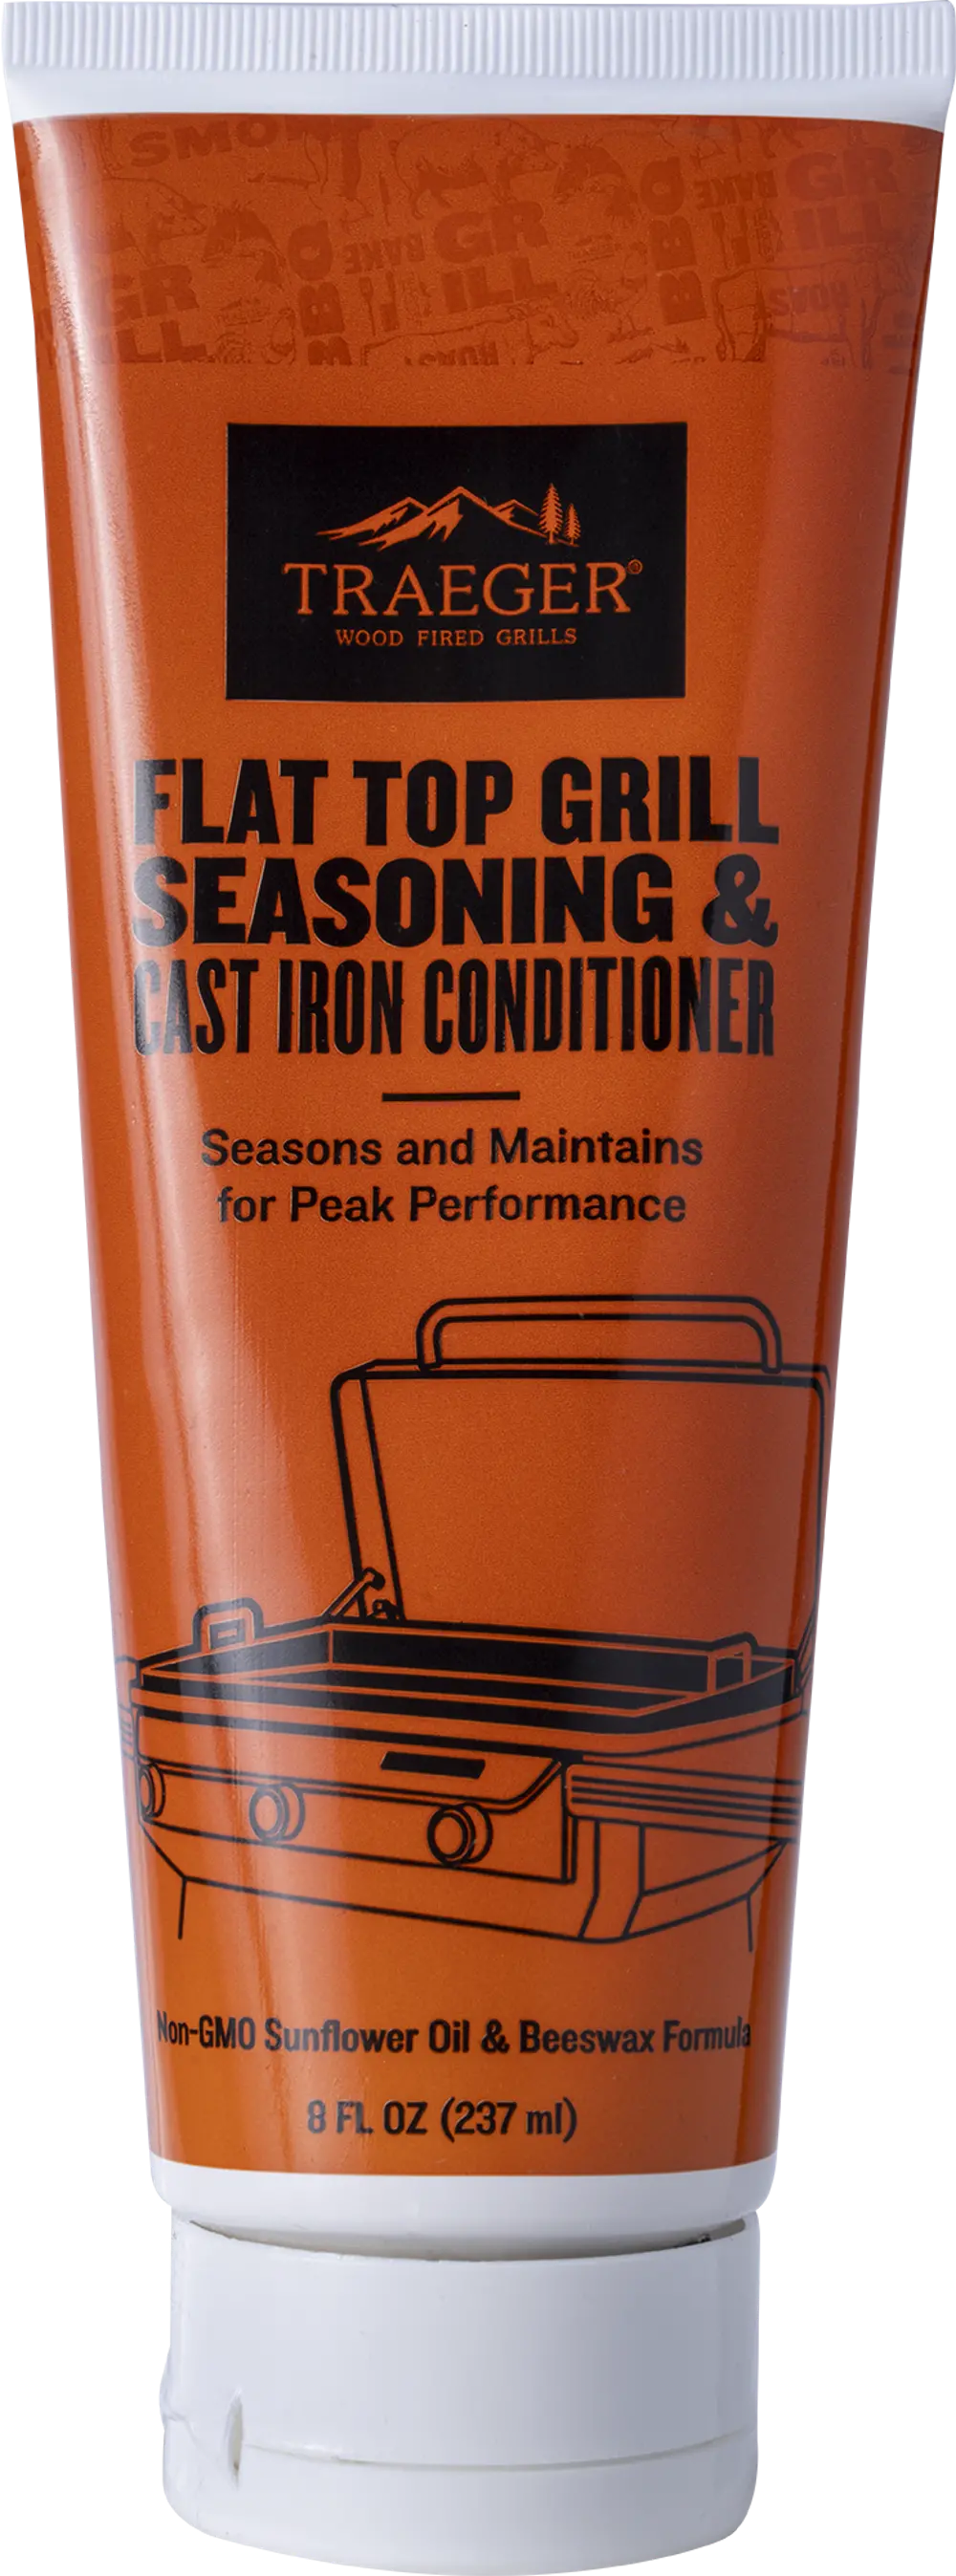 BAC731 Traeger Flat Top Grill Seasoning & Cast Iron Conditioner-1